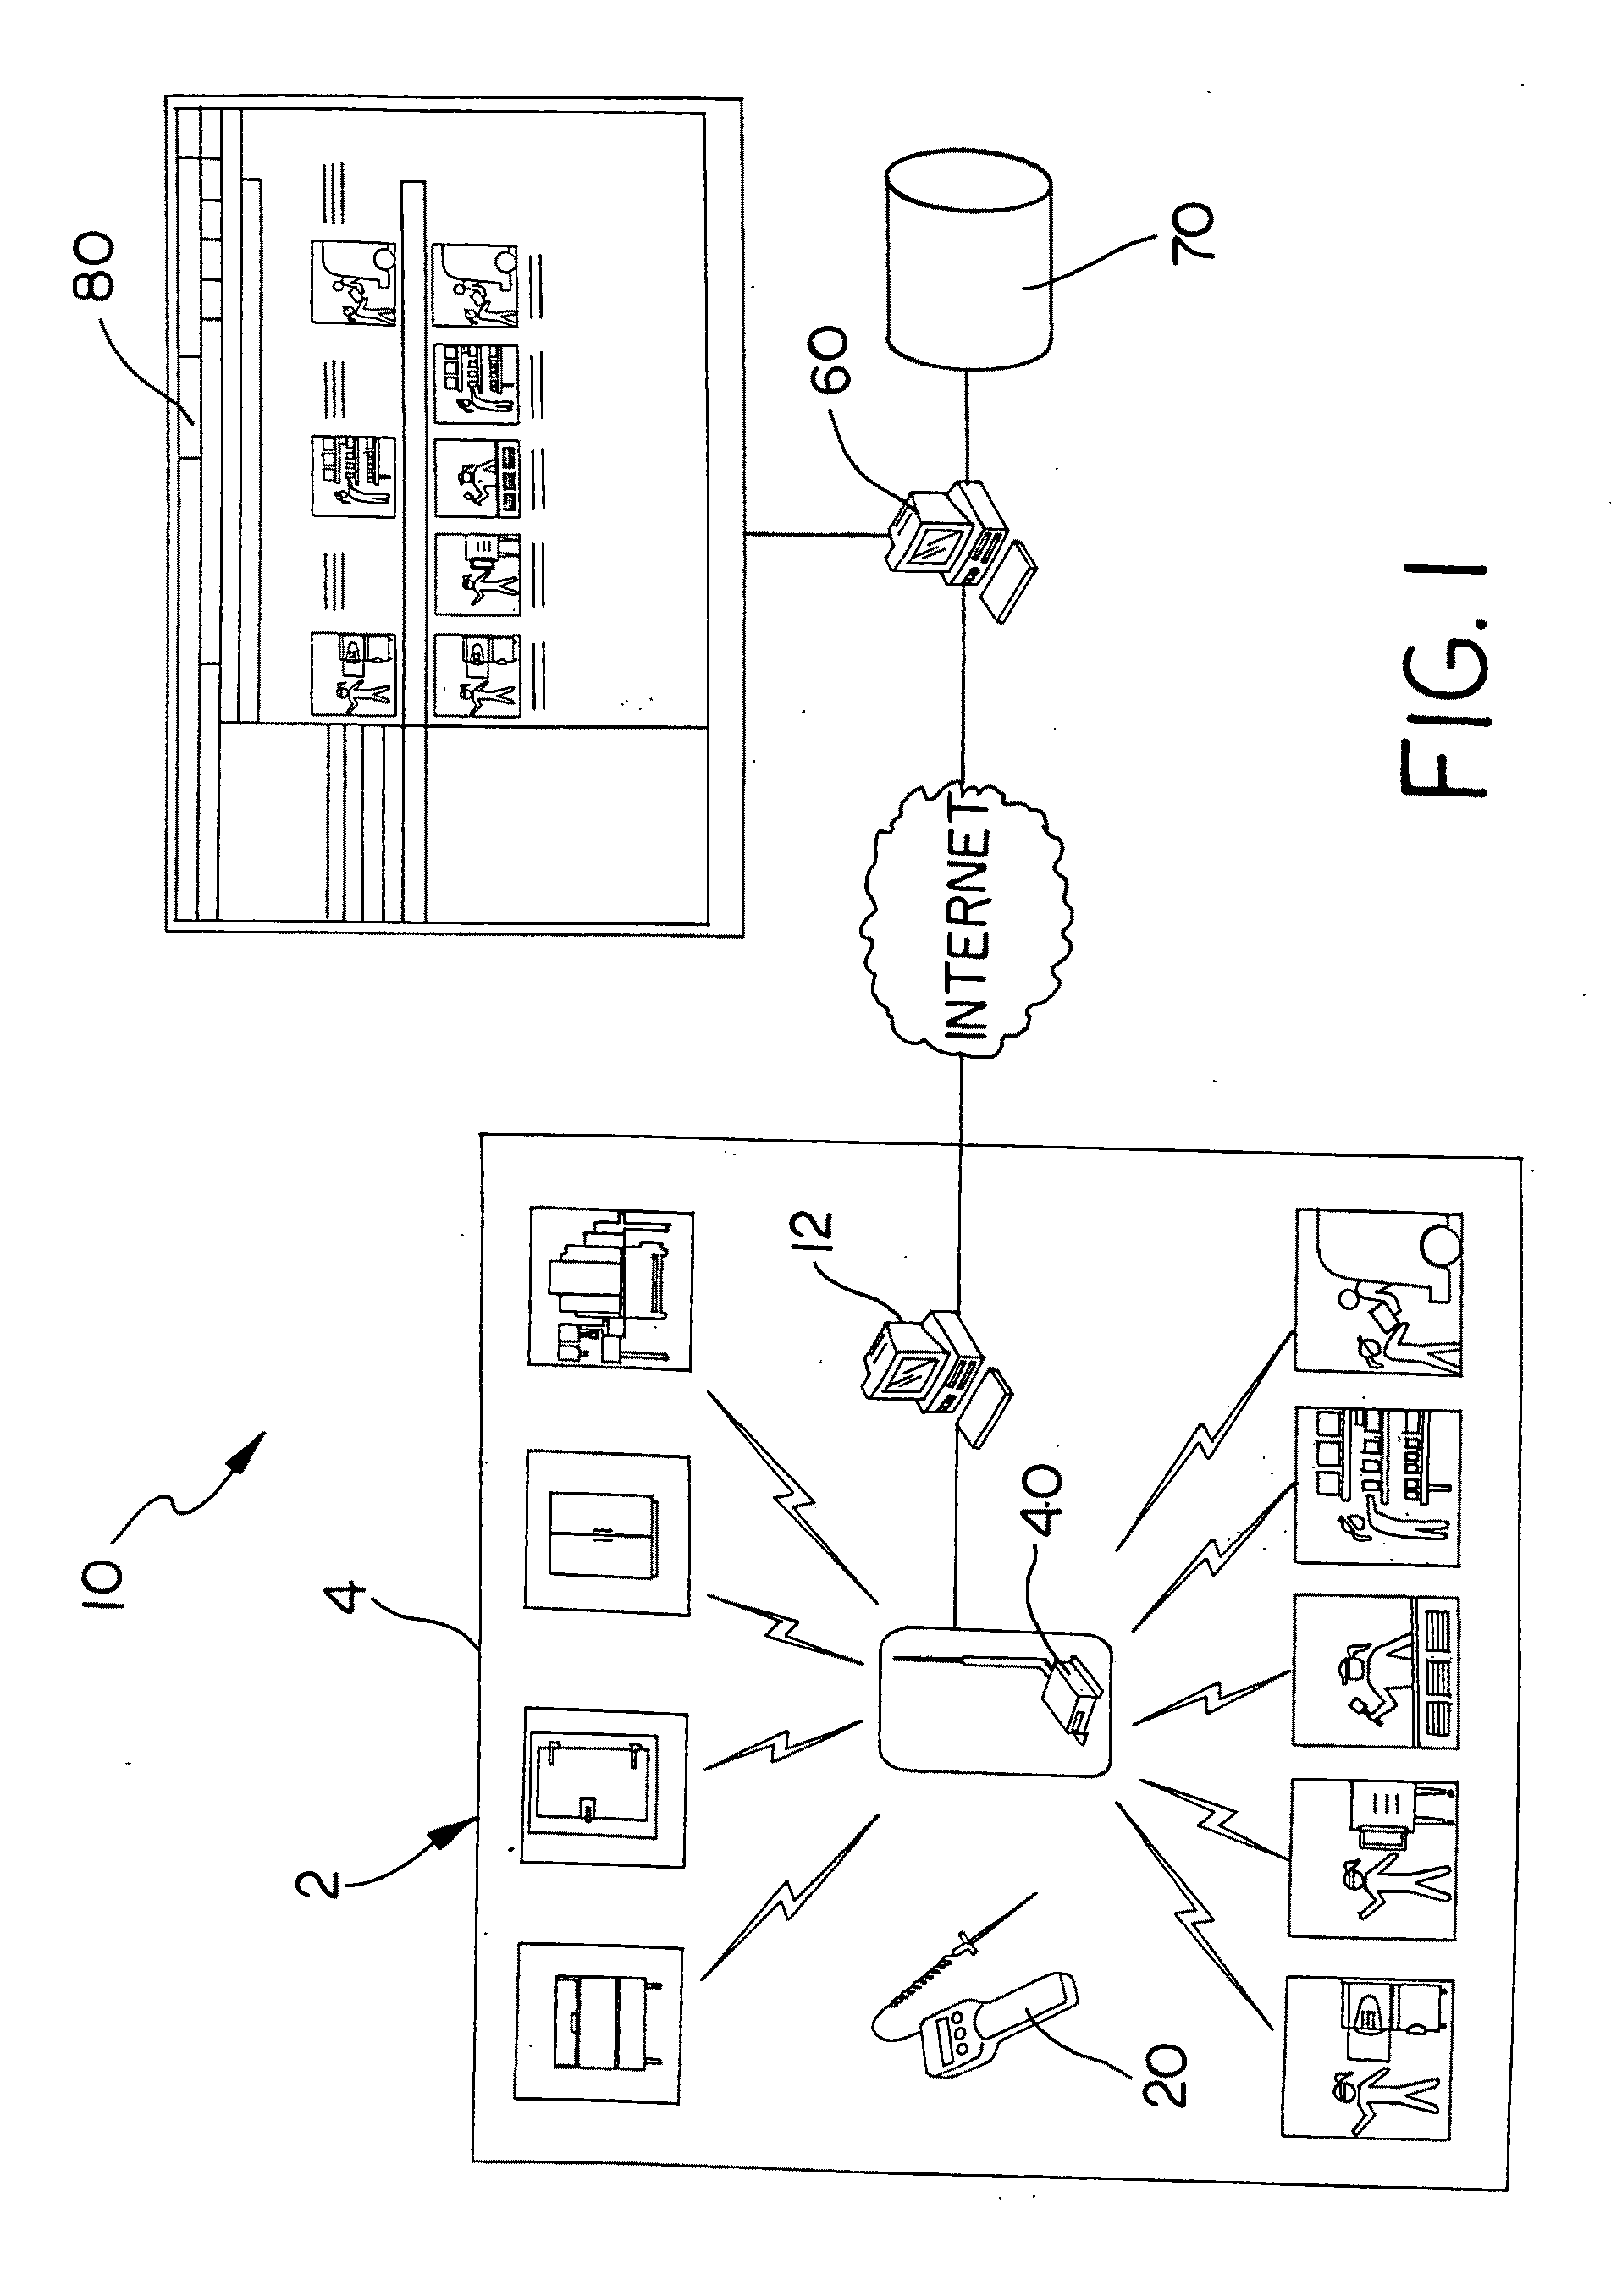 System and method for collecting, Transferring and managing quality control data